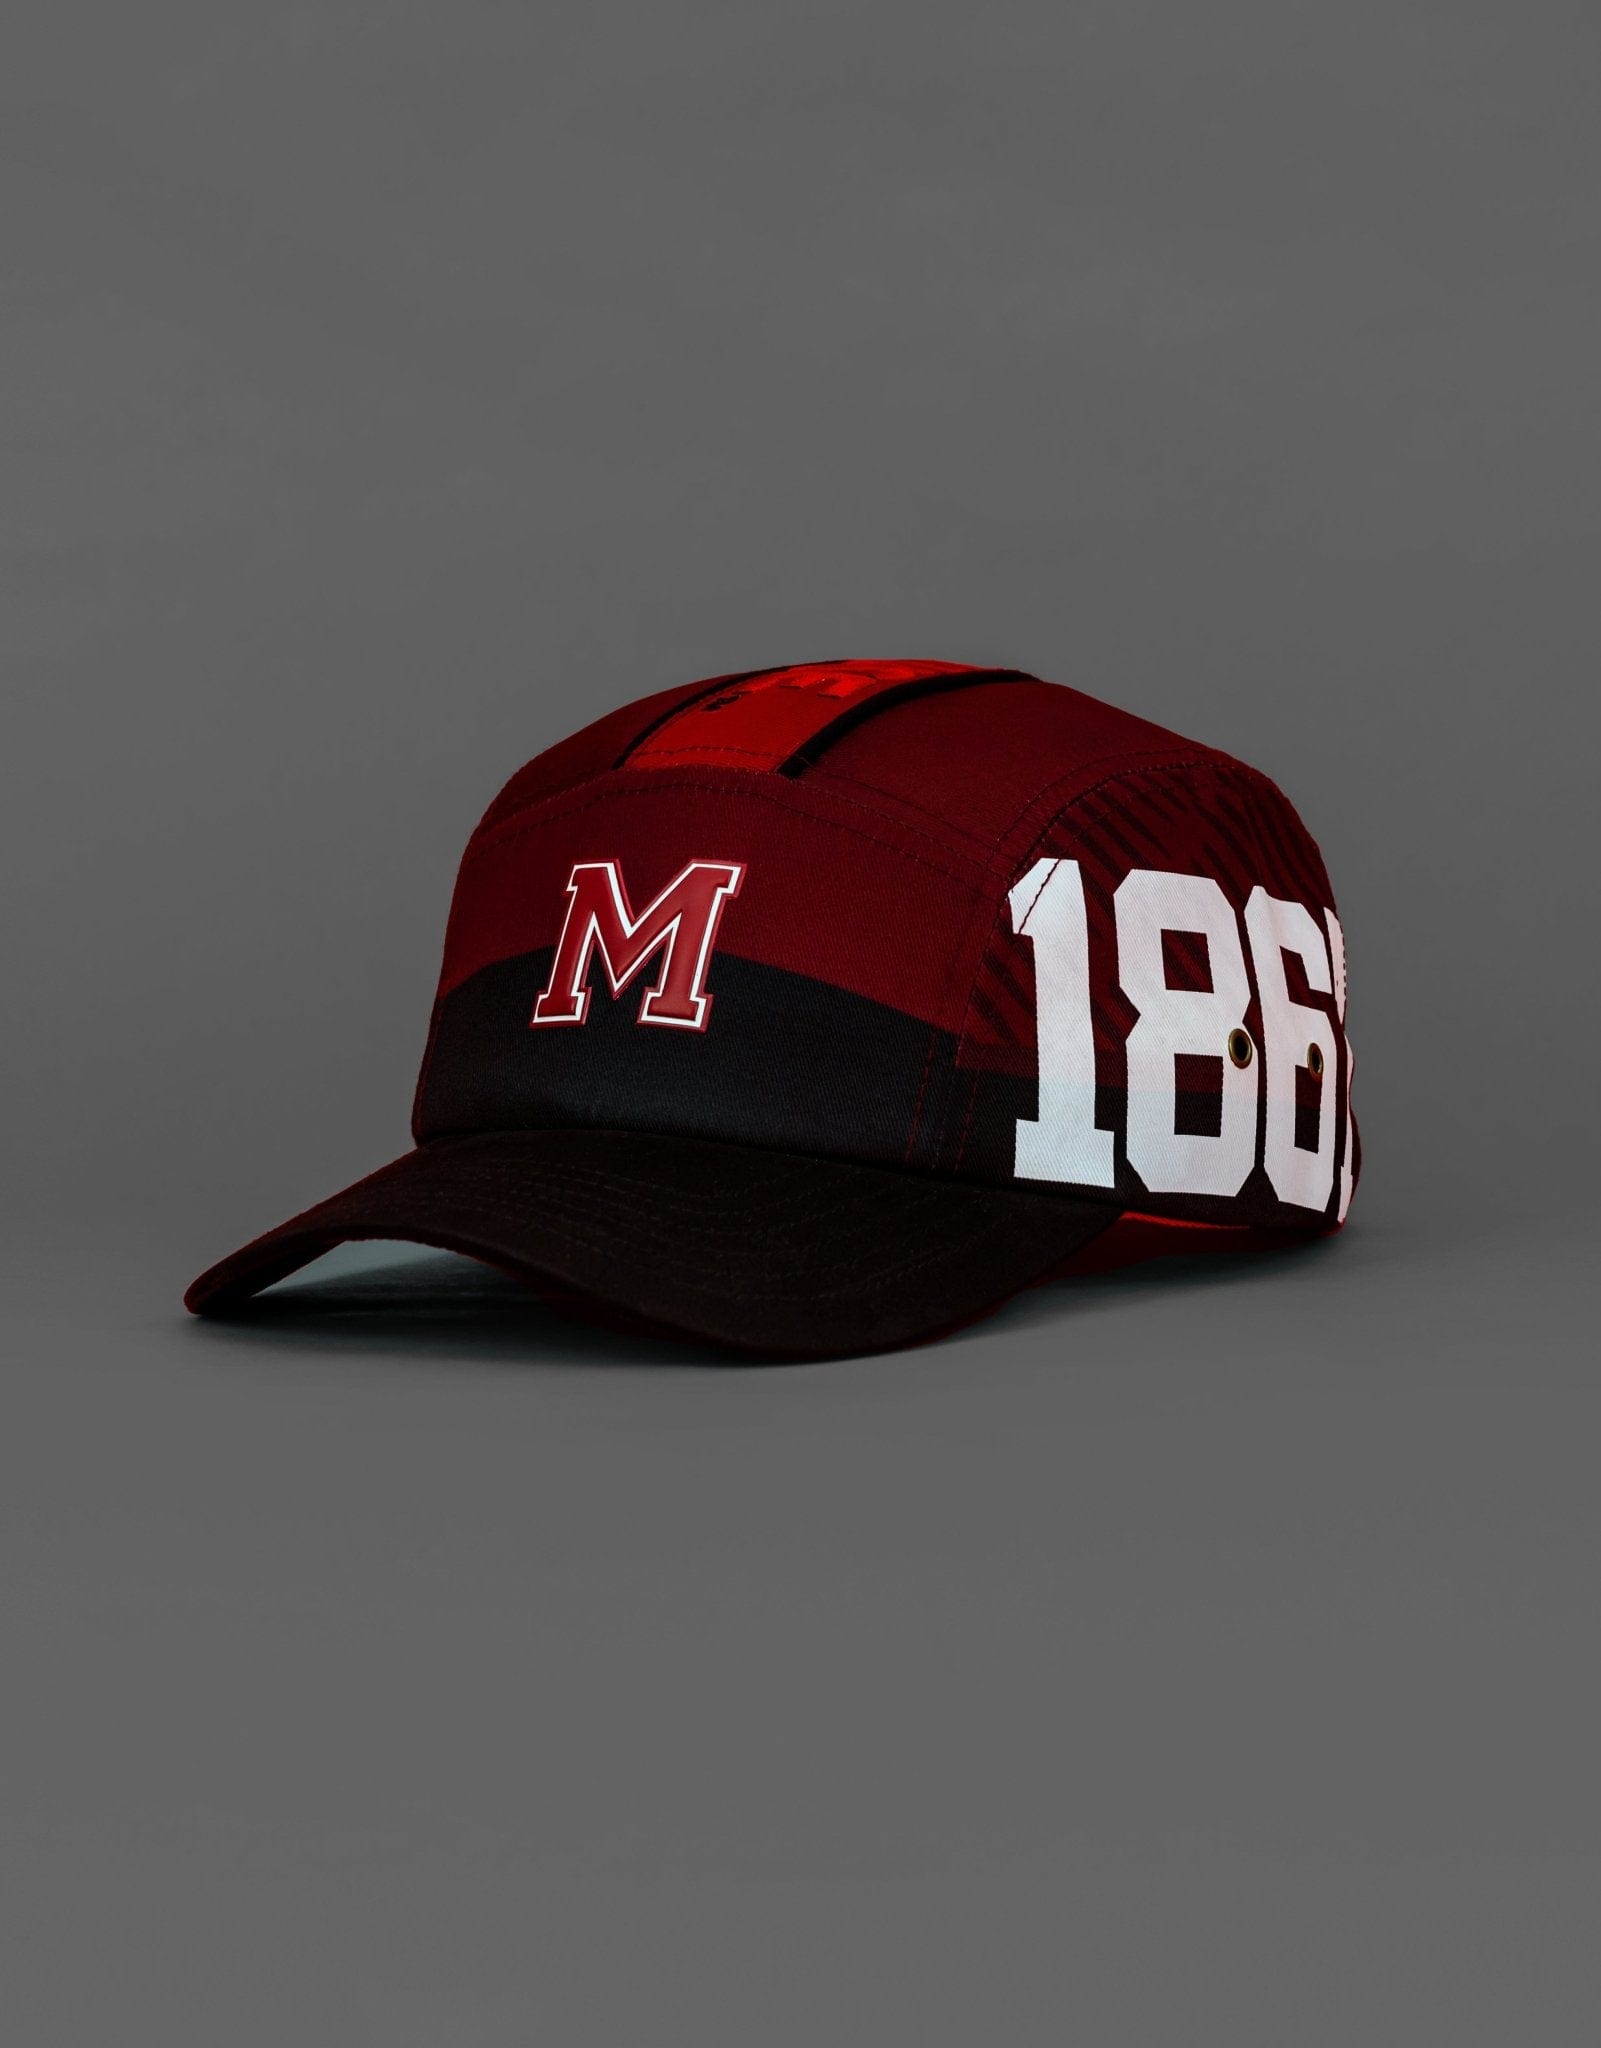 TheYard - Morehouse College - HBCU Hat